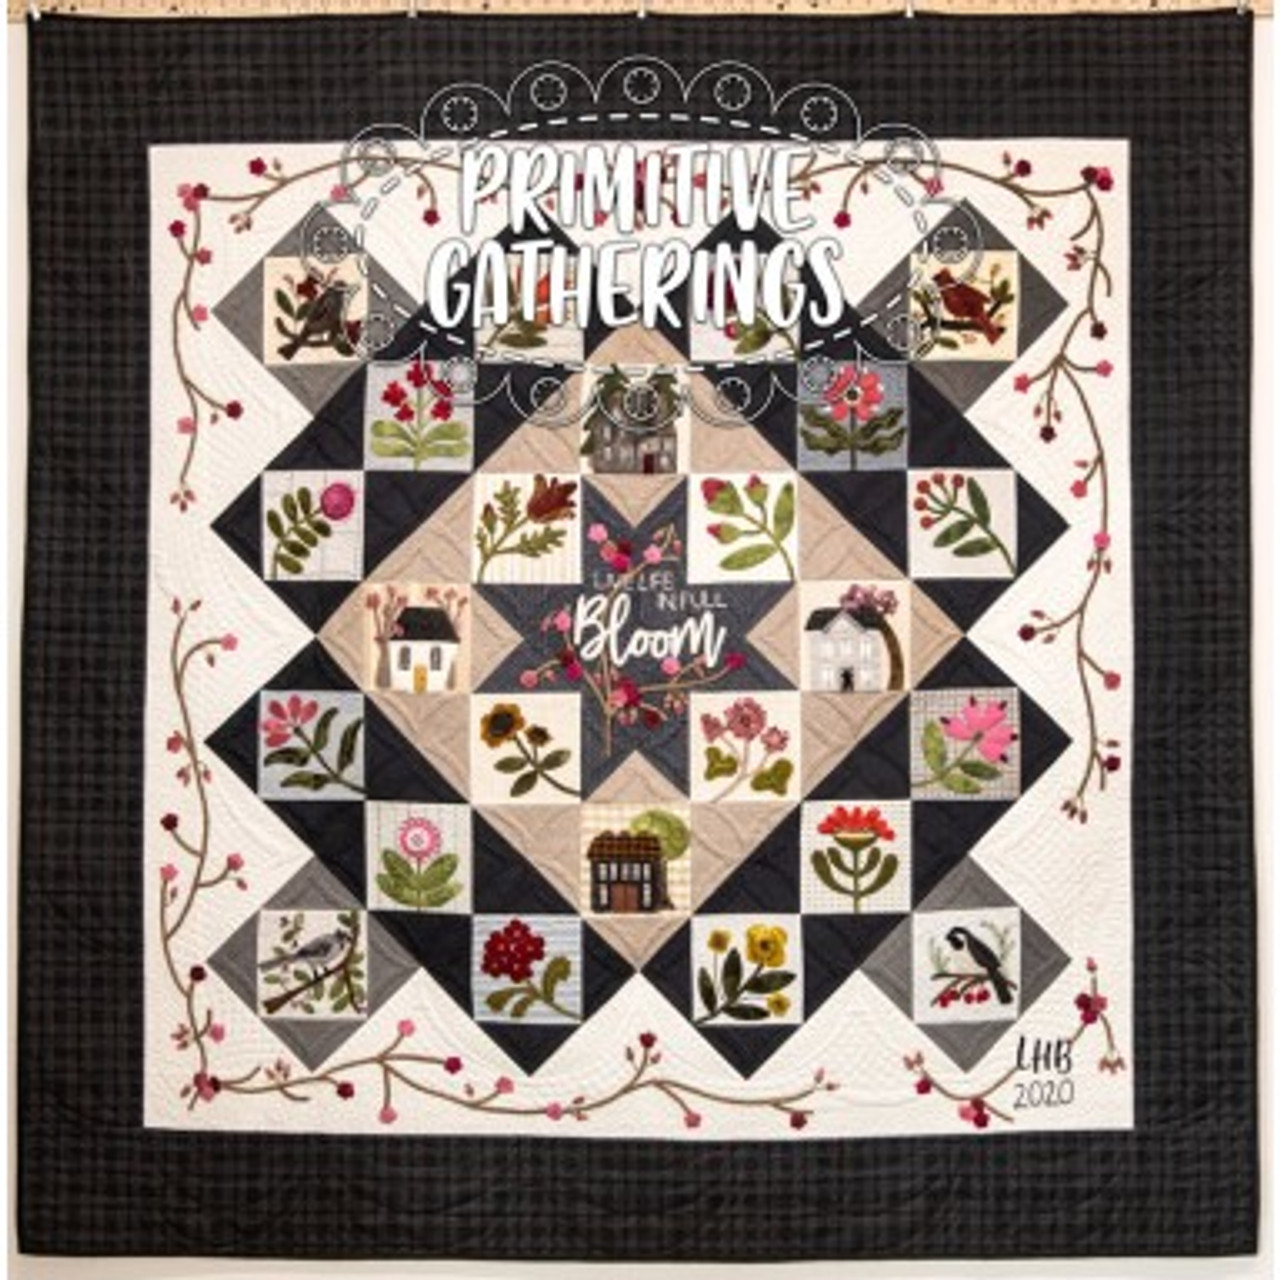 ALL THINGS PRIMITIVE GATHERINGS - Wool Kits - Page 1 - Primitive Gatherings  Quilt Shop